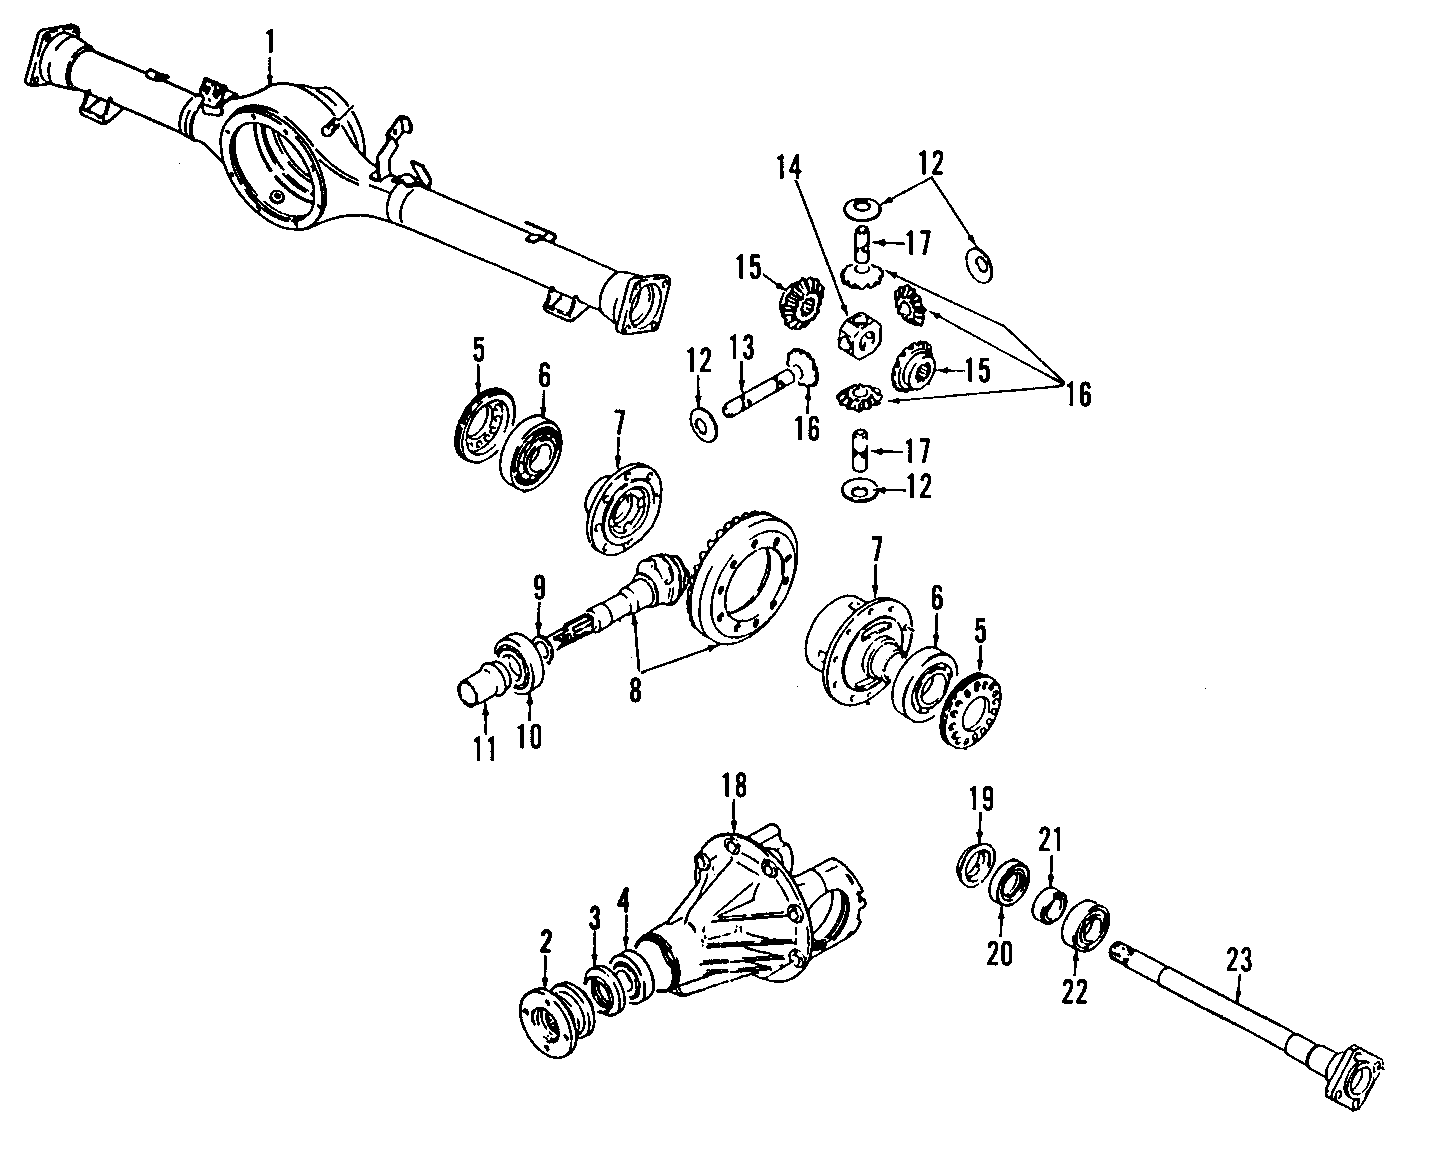 22REAR AXLE. DIFFERENTIAL. PROPELLER SHAFT.https://images.simplepart.com/images/parts/motor/fullsize/T011110.png